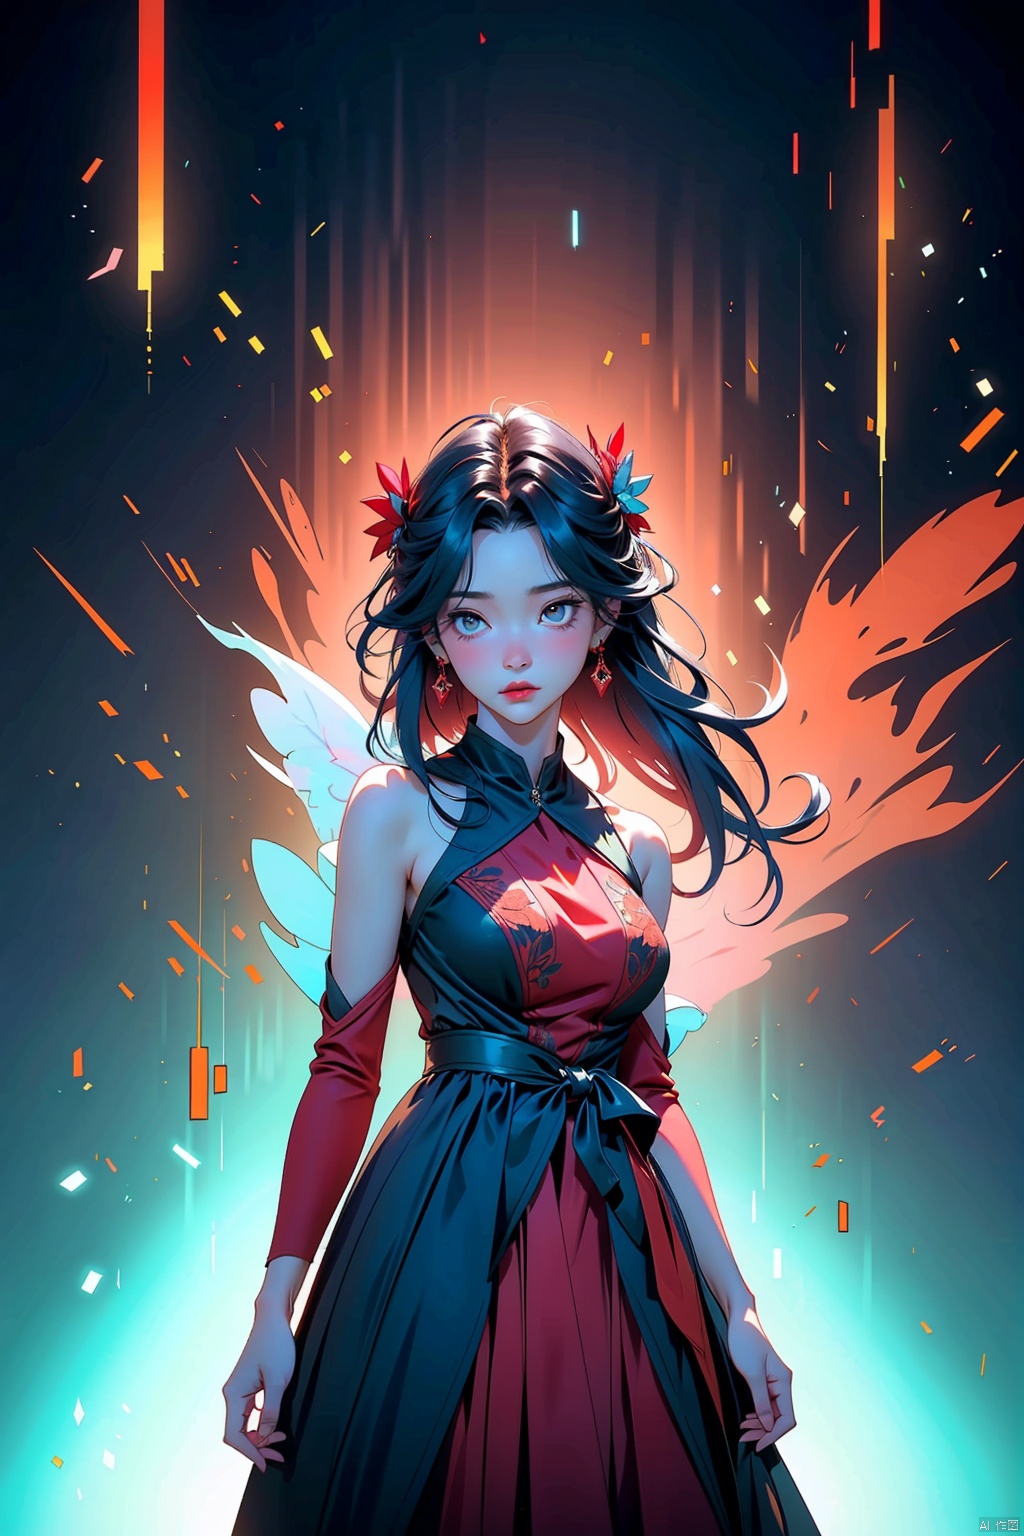  illustration of woman by by Brian Foud, she wearing a flower short dress, leaning, colorful, dark background, flower armor, red theme, exposure blend, medium shot, bokeh, (HDR:1.4), high contrast, (cinematic, teal and orange:0.85), (muted colors, dim colors, soothing tones:1.3), low saturation,best quality